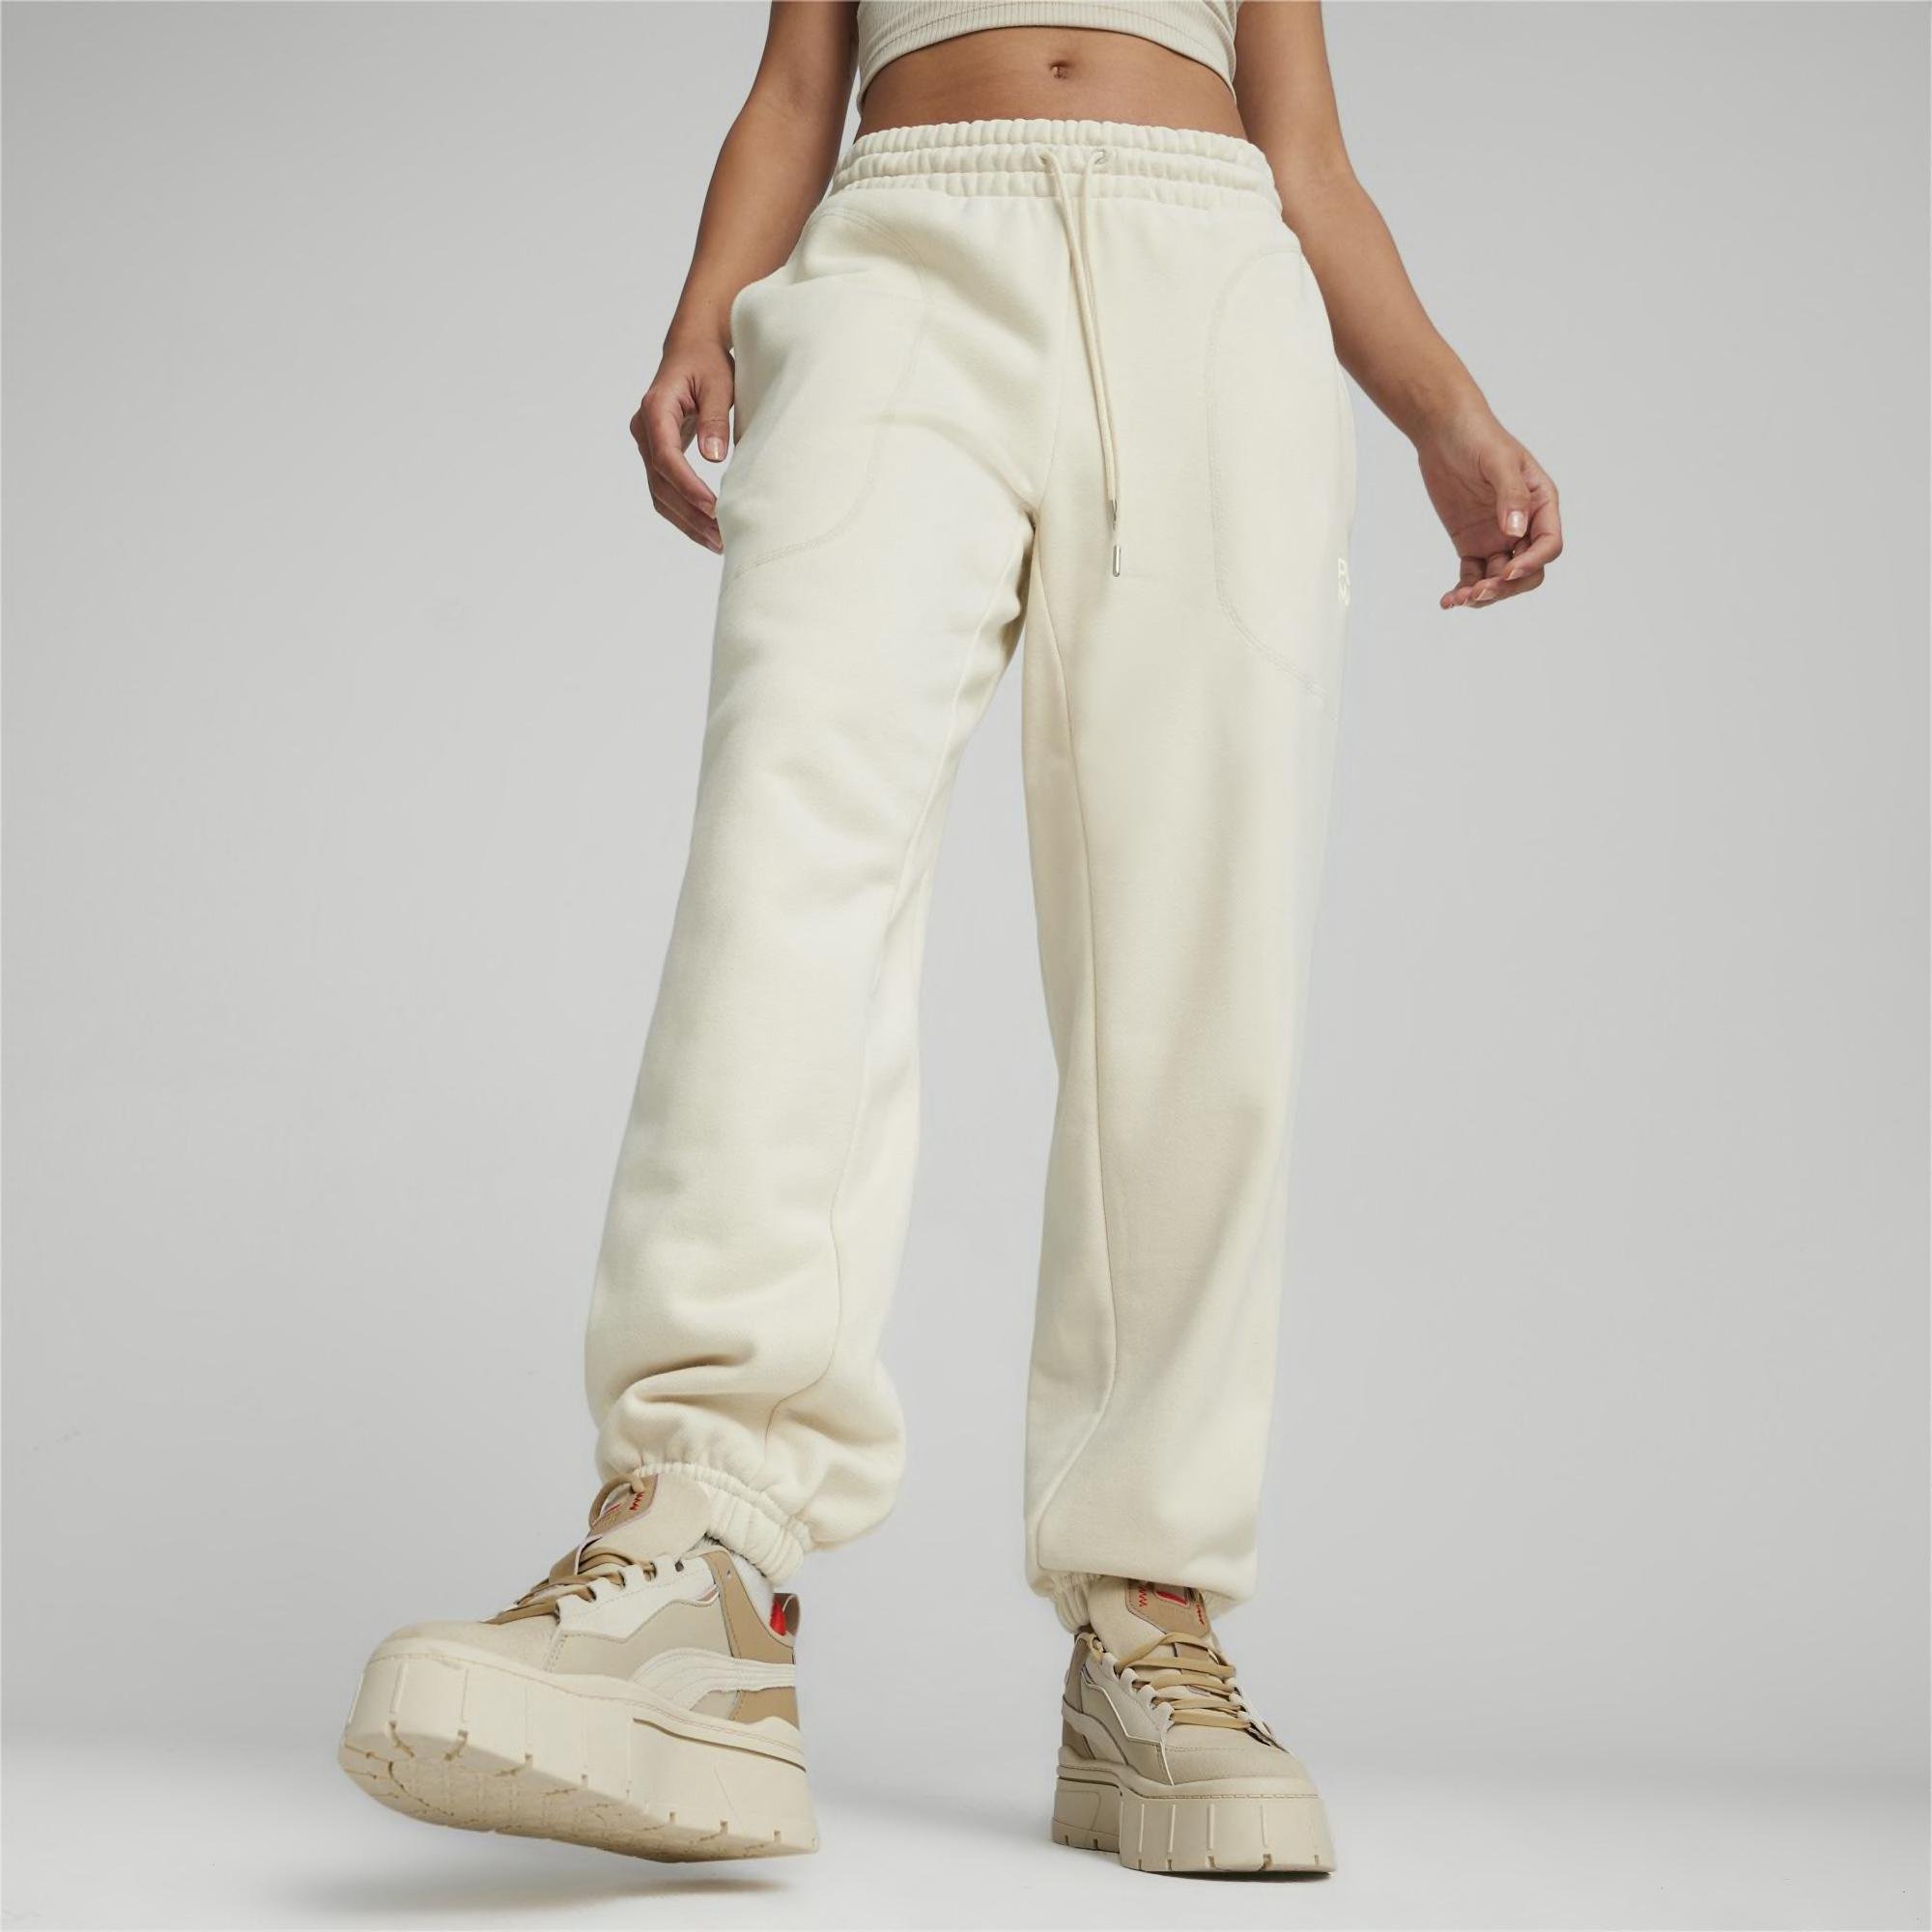 INFUSE Women's Relaxed Sweatpants by PUMA